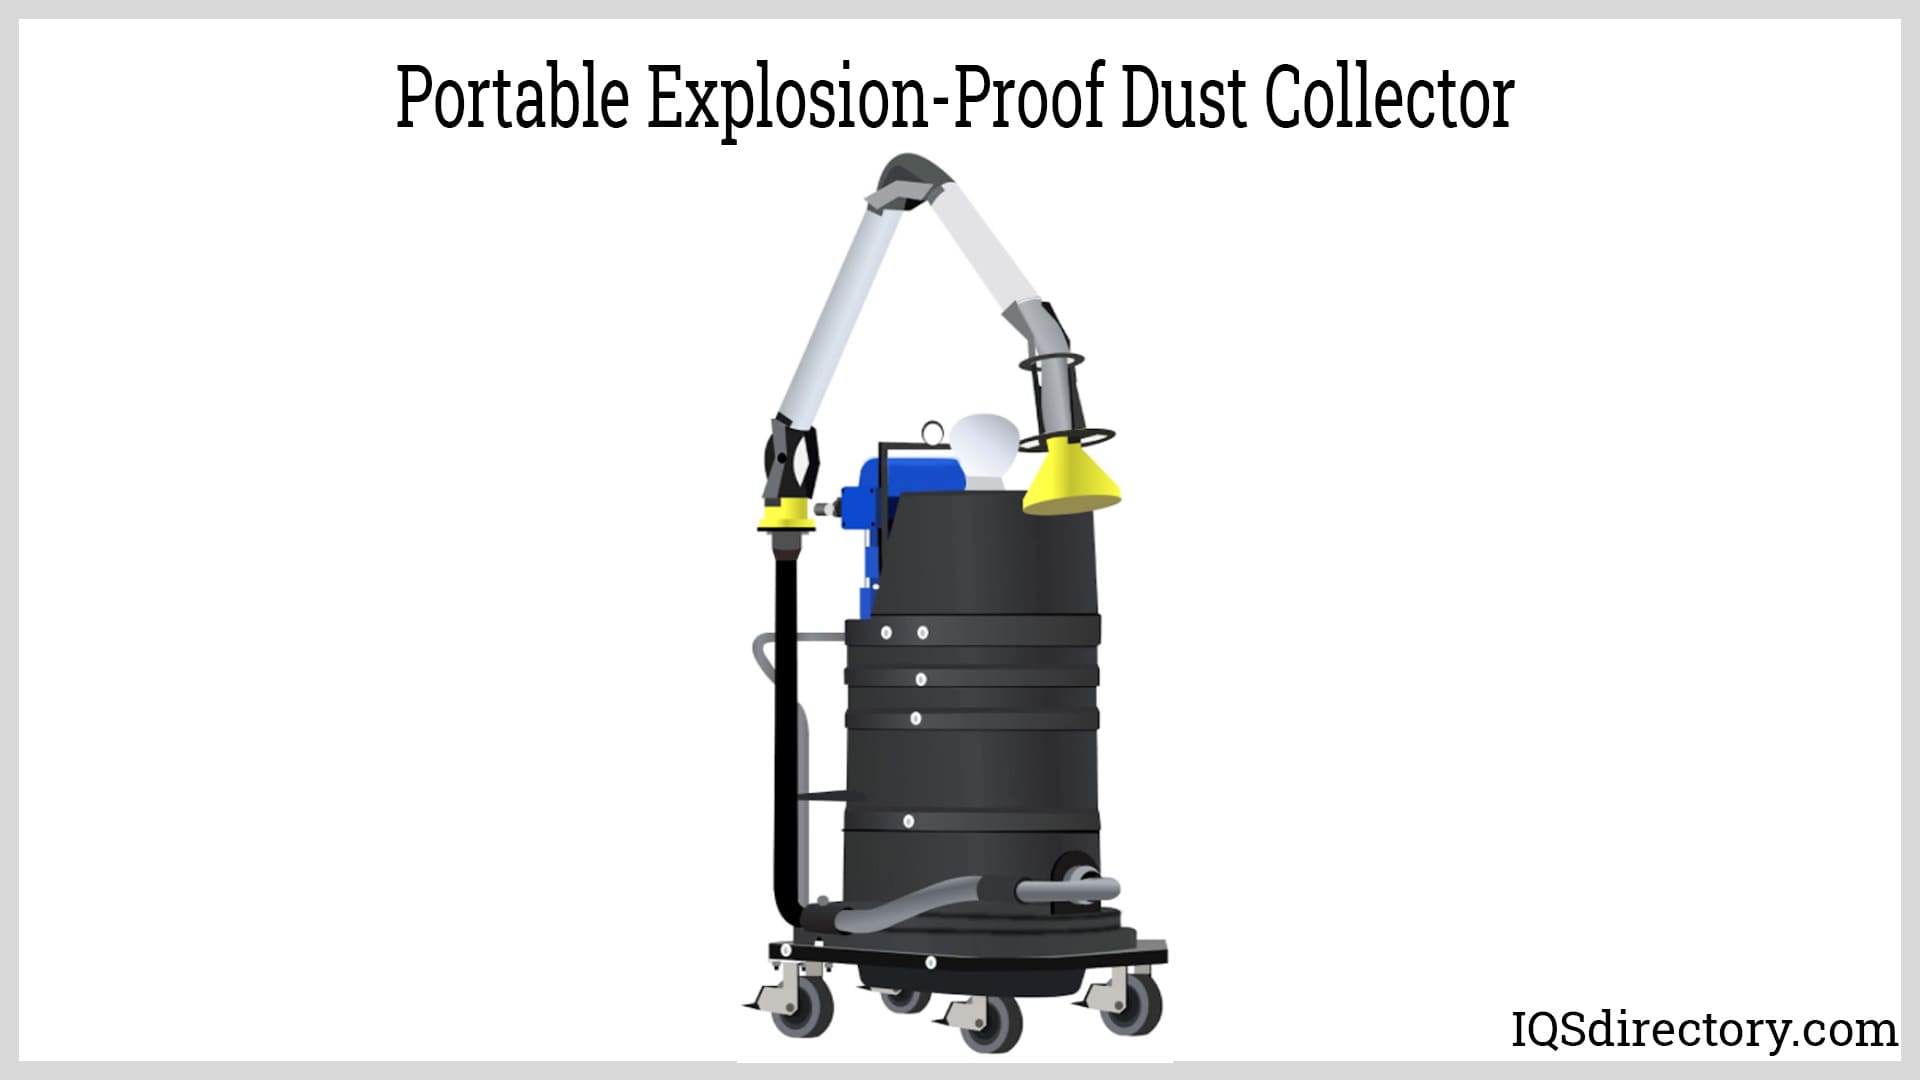 Portable Explosion-Proof Dust Collector